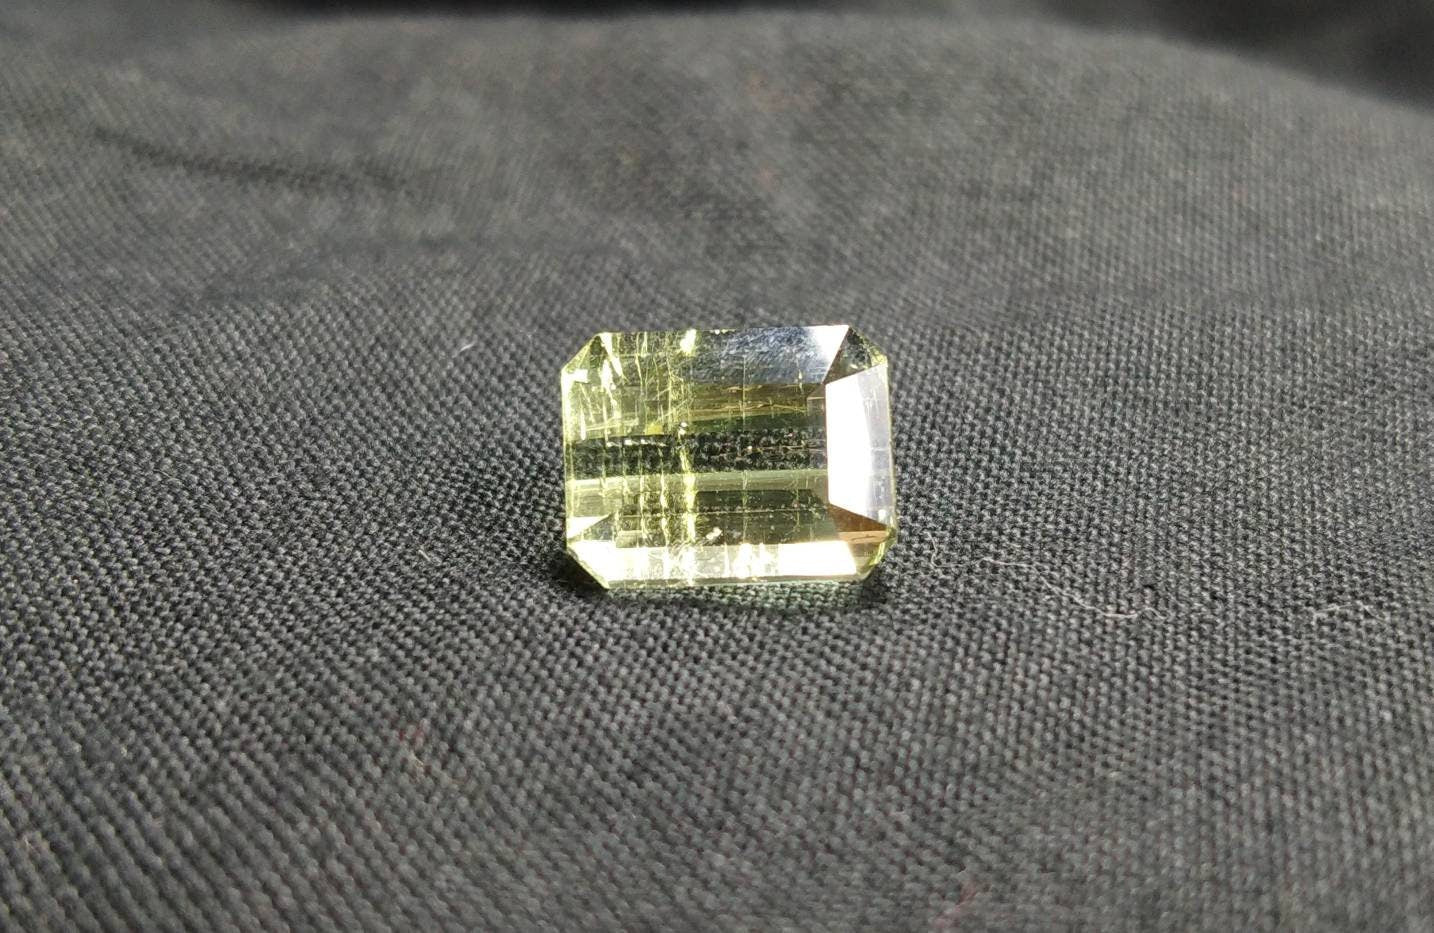 ARSAA GEMS AND MINERALSNatural high quality beautiful 6 carats faceted radiant shape yellow tourmaline gem - Premium  from ARSAA GEMS AND MINERALS - Just $75.00! Shop now at ARSAA GEMS AND MINERALS